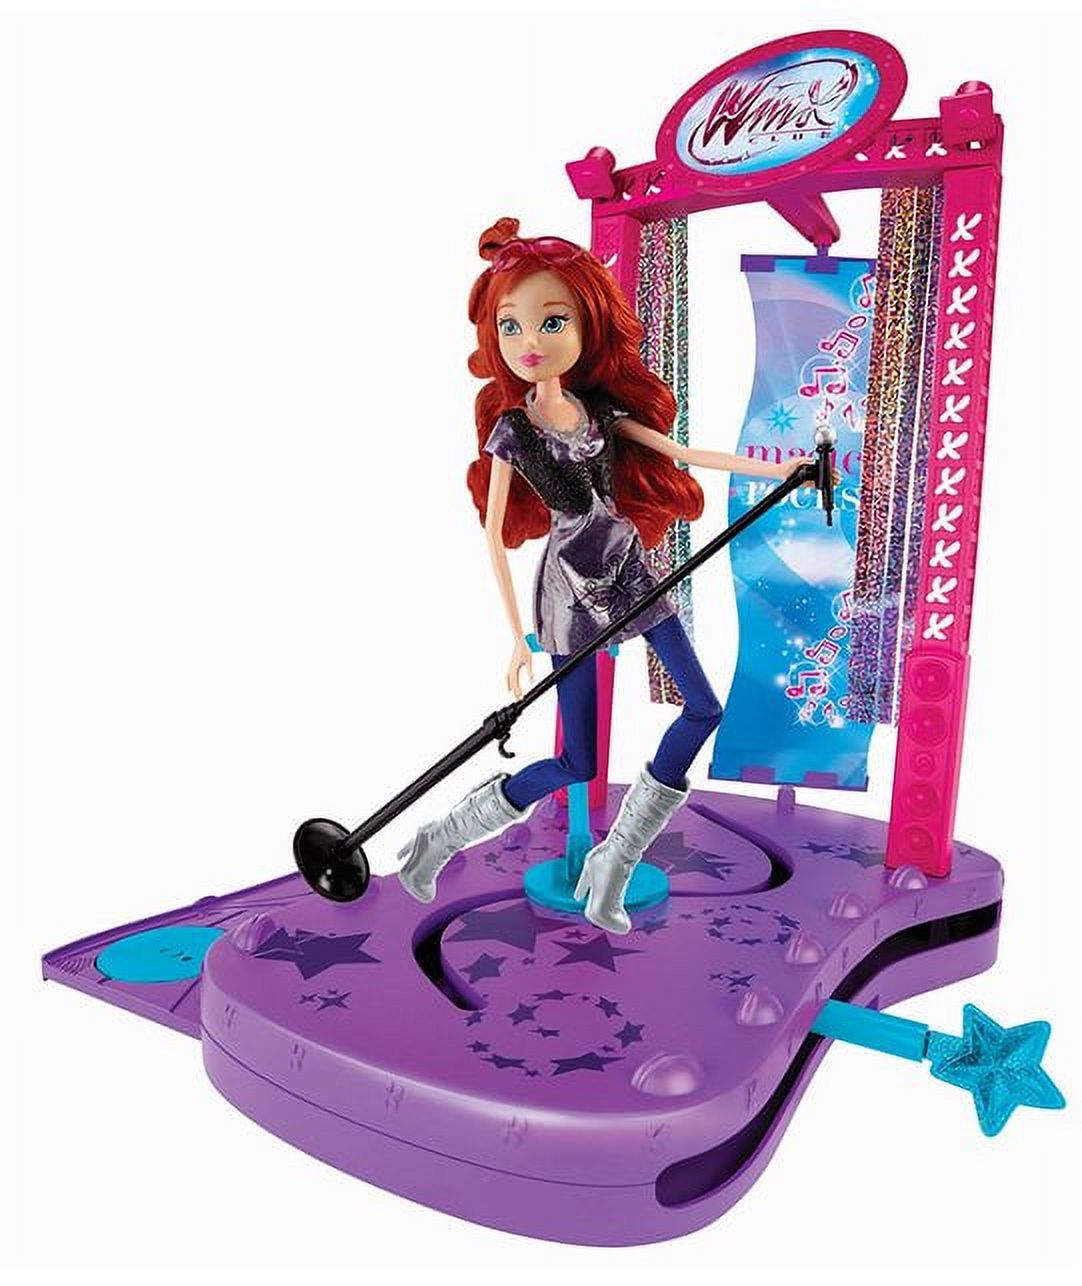 Winx Club Concert Stage Doll Playset - image 2 of 2